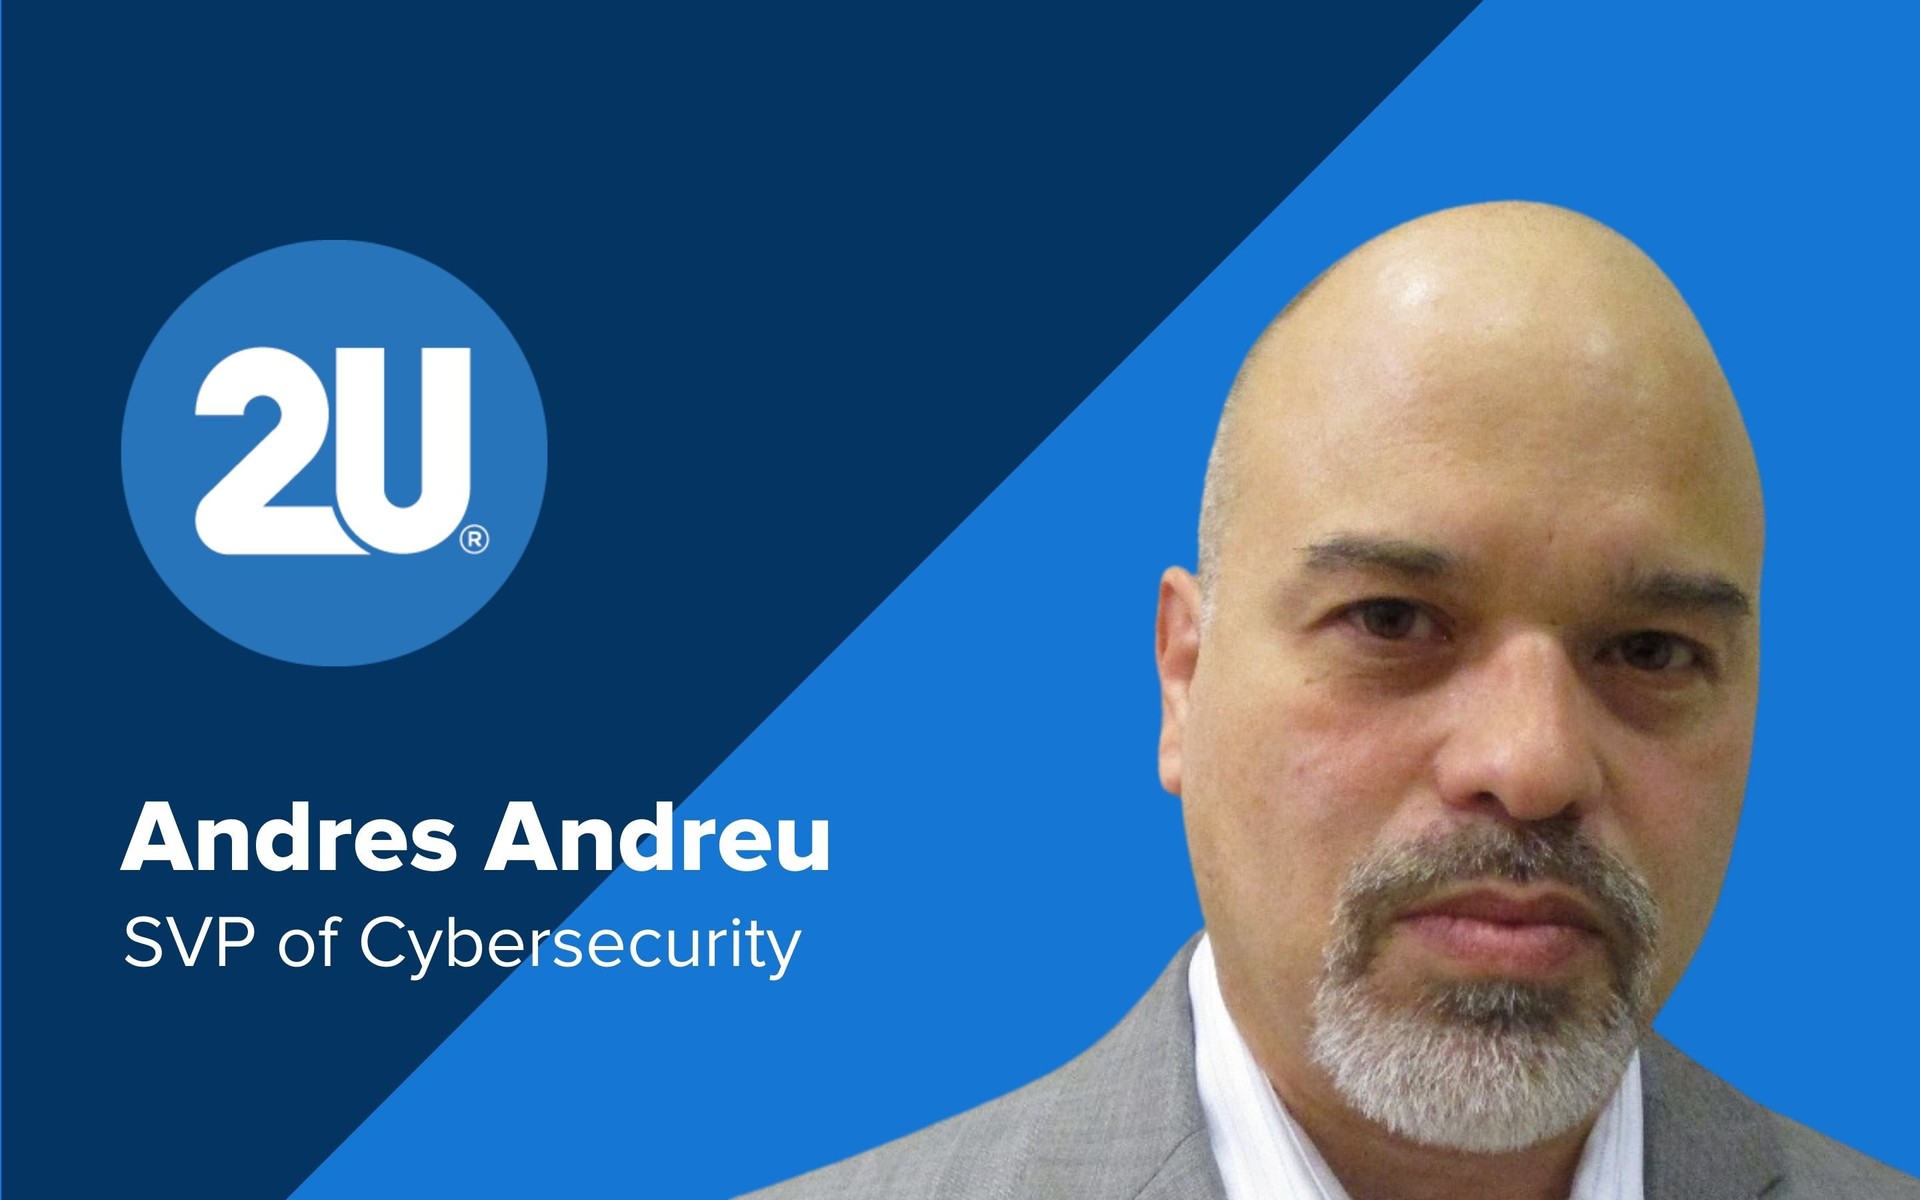 Andres Andreu, SVP of Cybersecurity